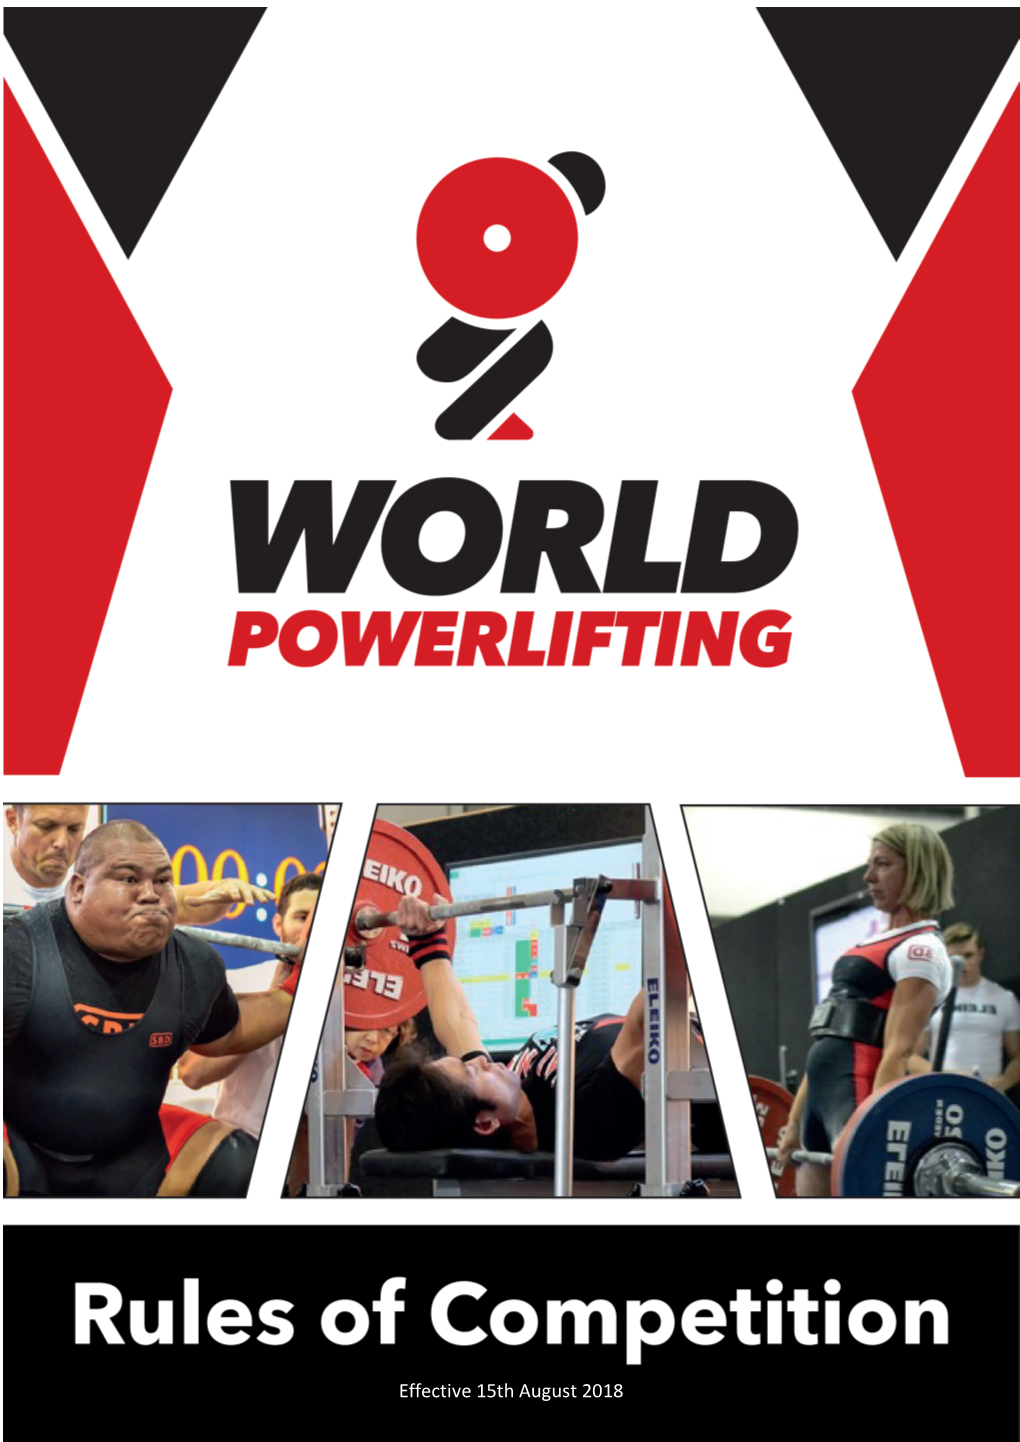 Rules of Competition for the Sport of Powerlifting, As Conducted by World Powerlifting Ltd